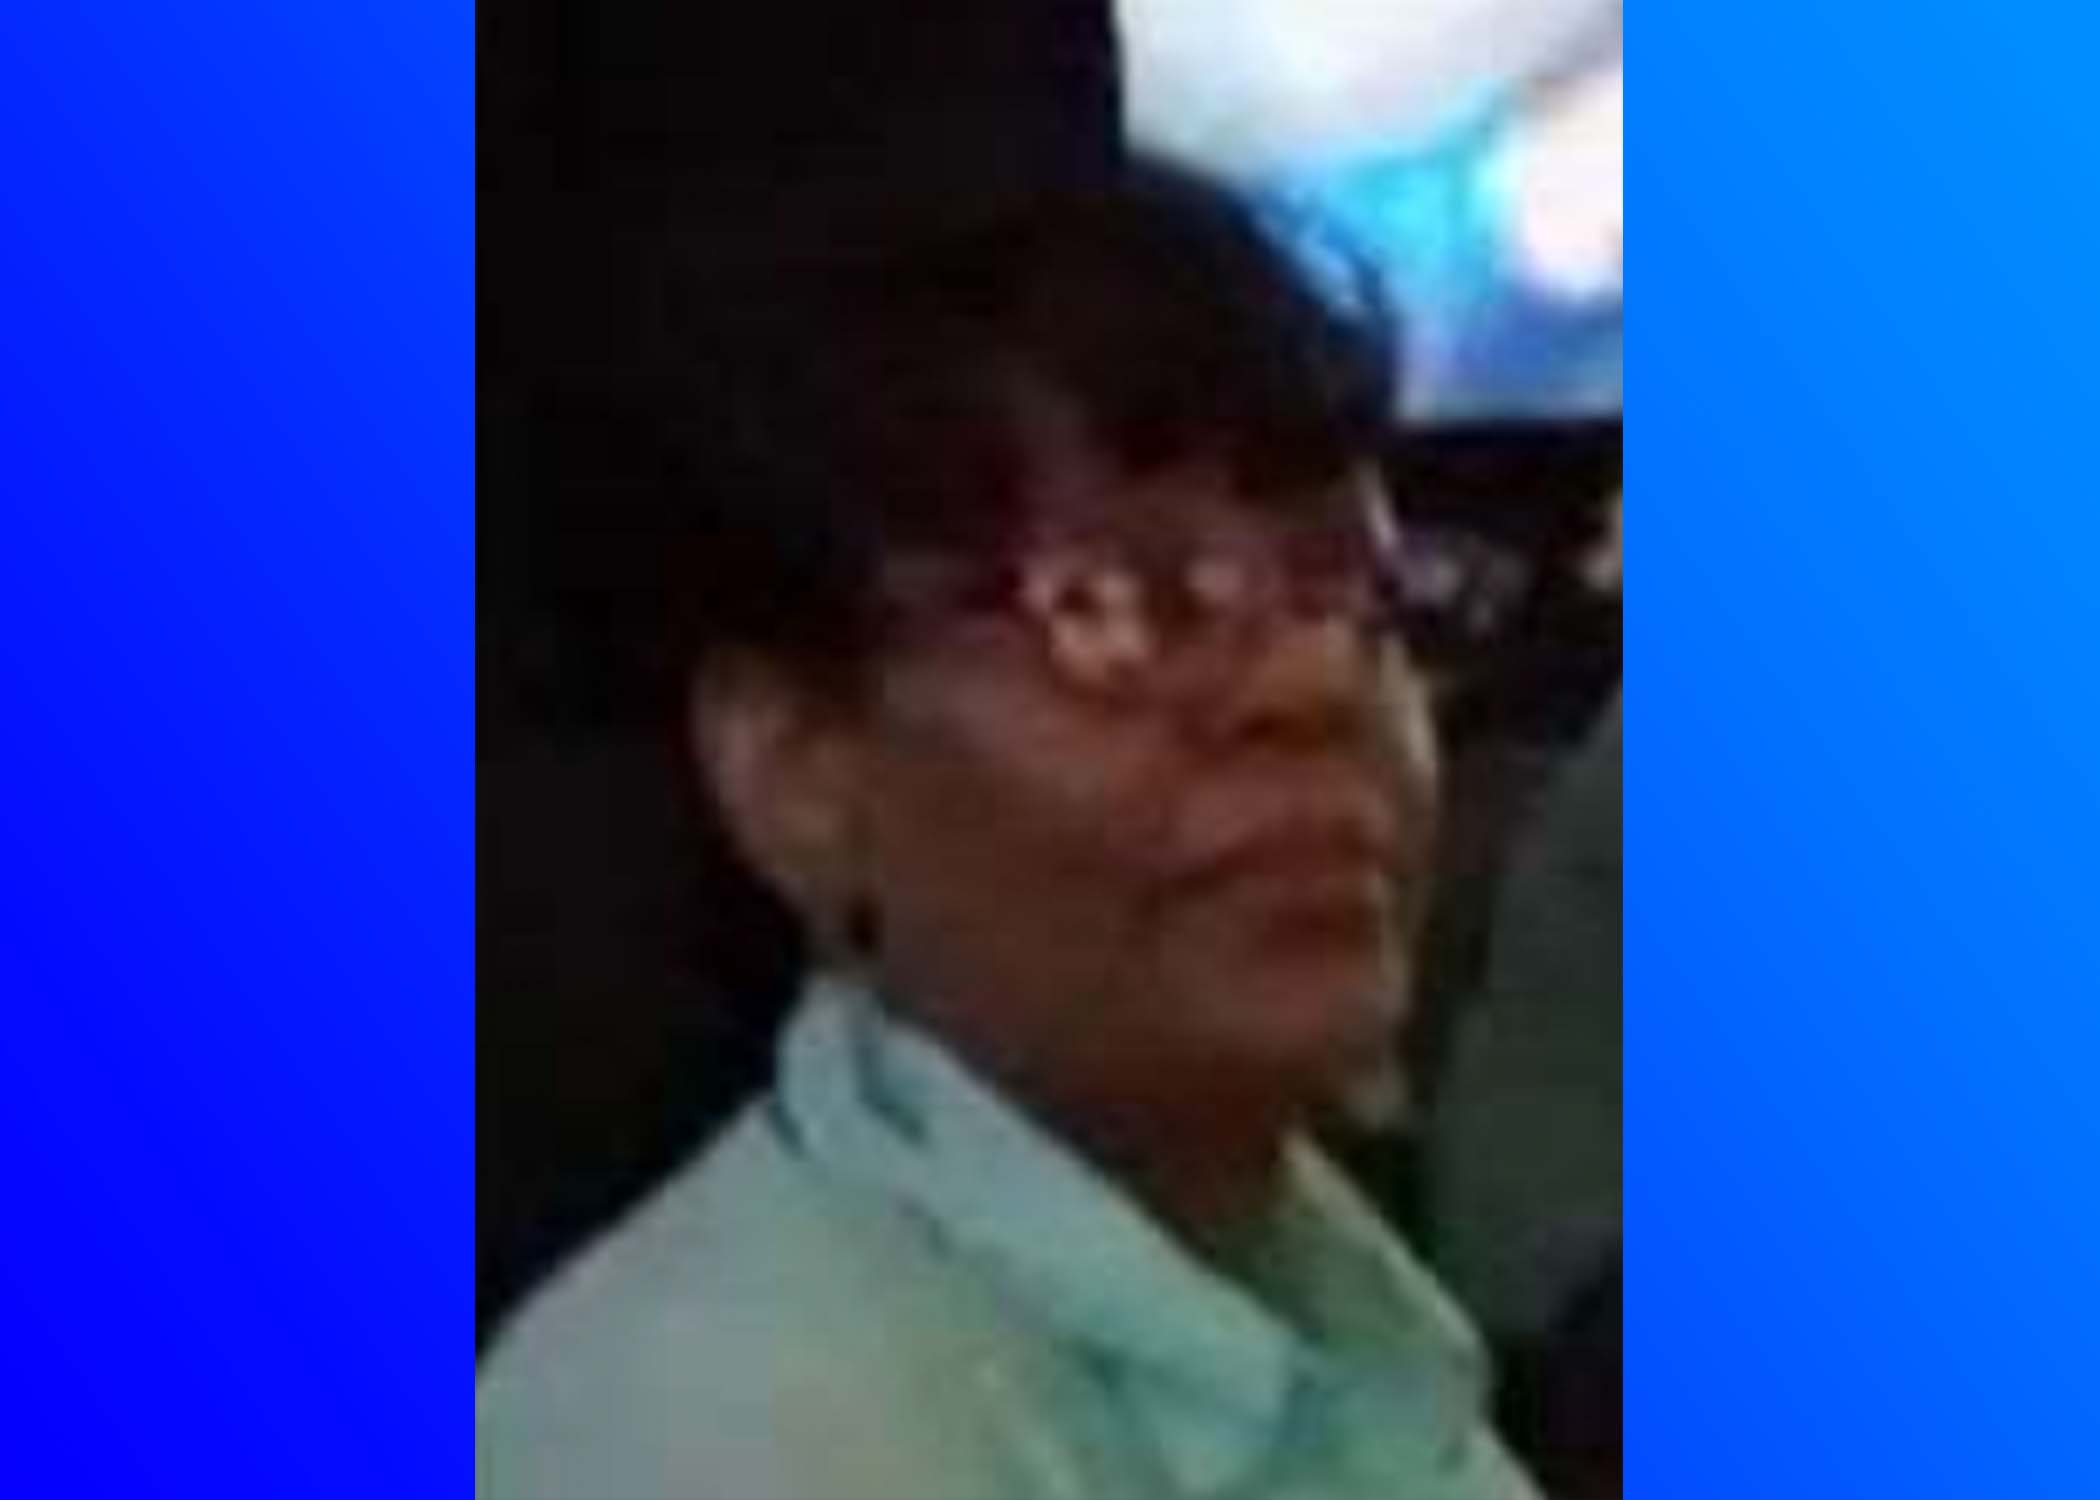 Search for missing Birmingham woman canceled